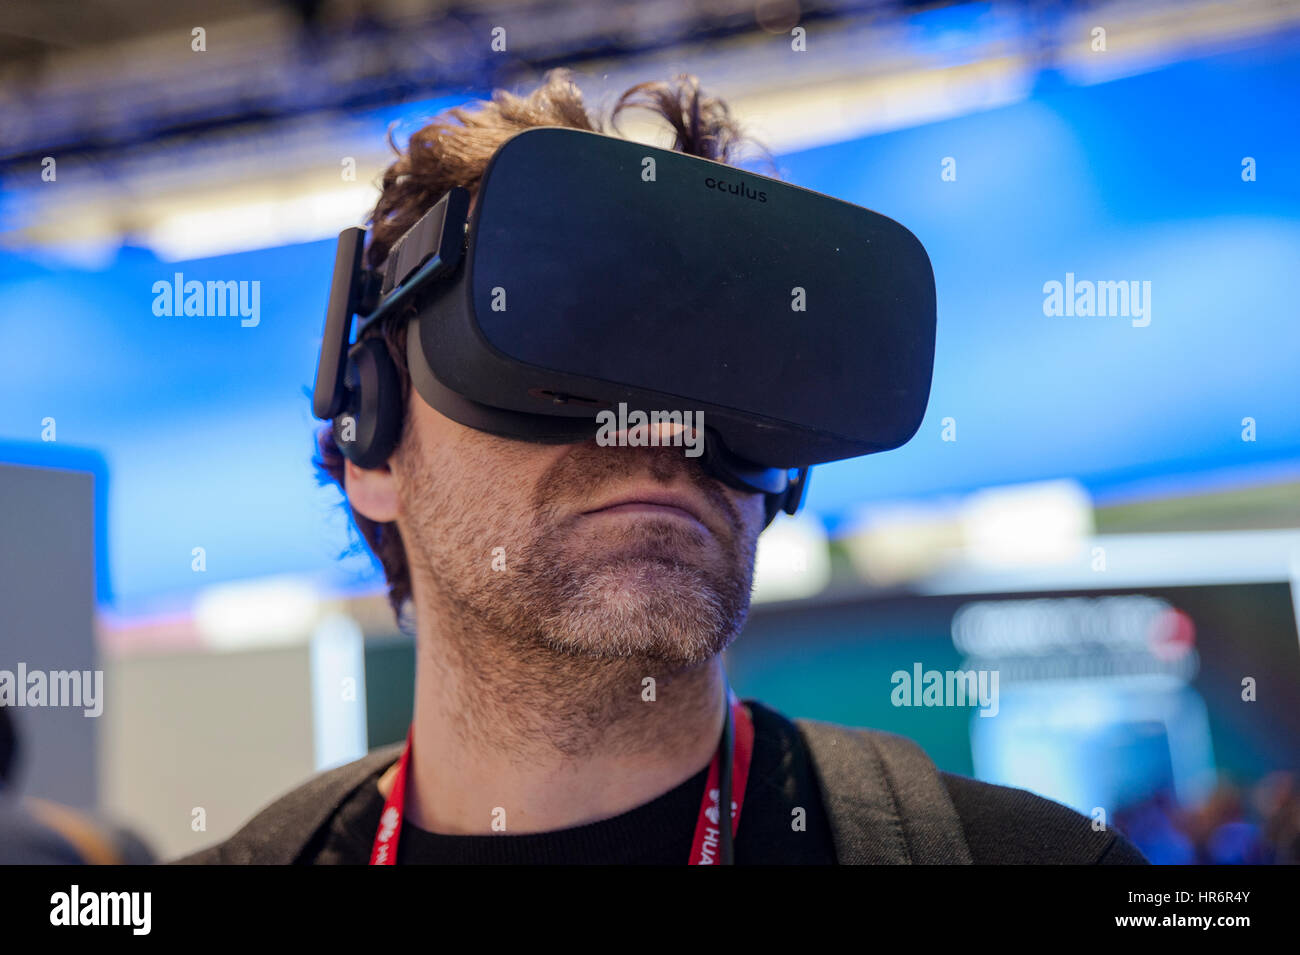 Barcelona, Spain. 27th Feb, 2017. Visitor testing a Oculus glasses during the Mobile World Congress wireless show in Barcelona. The annual Mobile World Congress hosts some of the world's largest communications companies, with many unveiling their latest phones and wearables gadgets. Credit: Charlie Perez/Alamy Live News Stock Photo